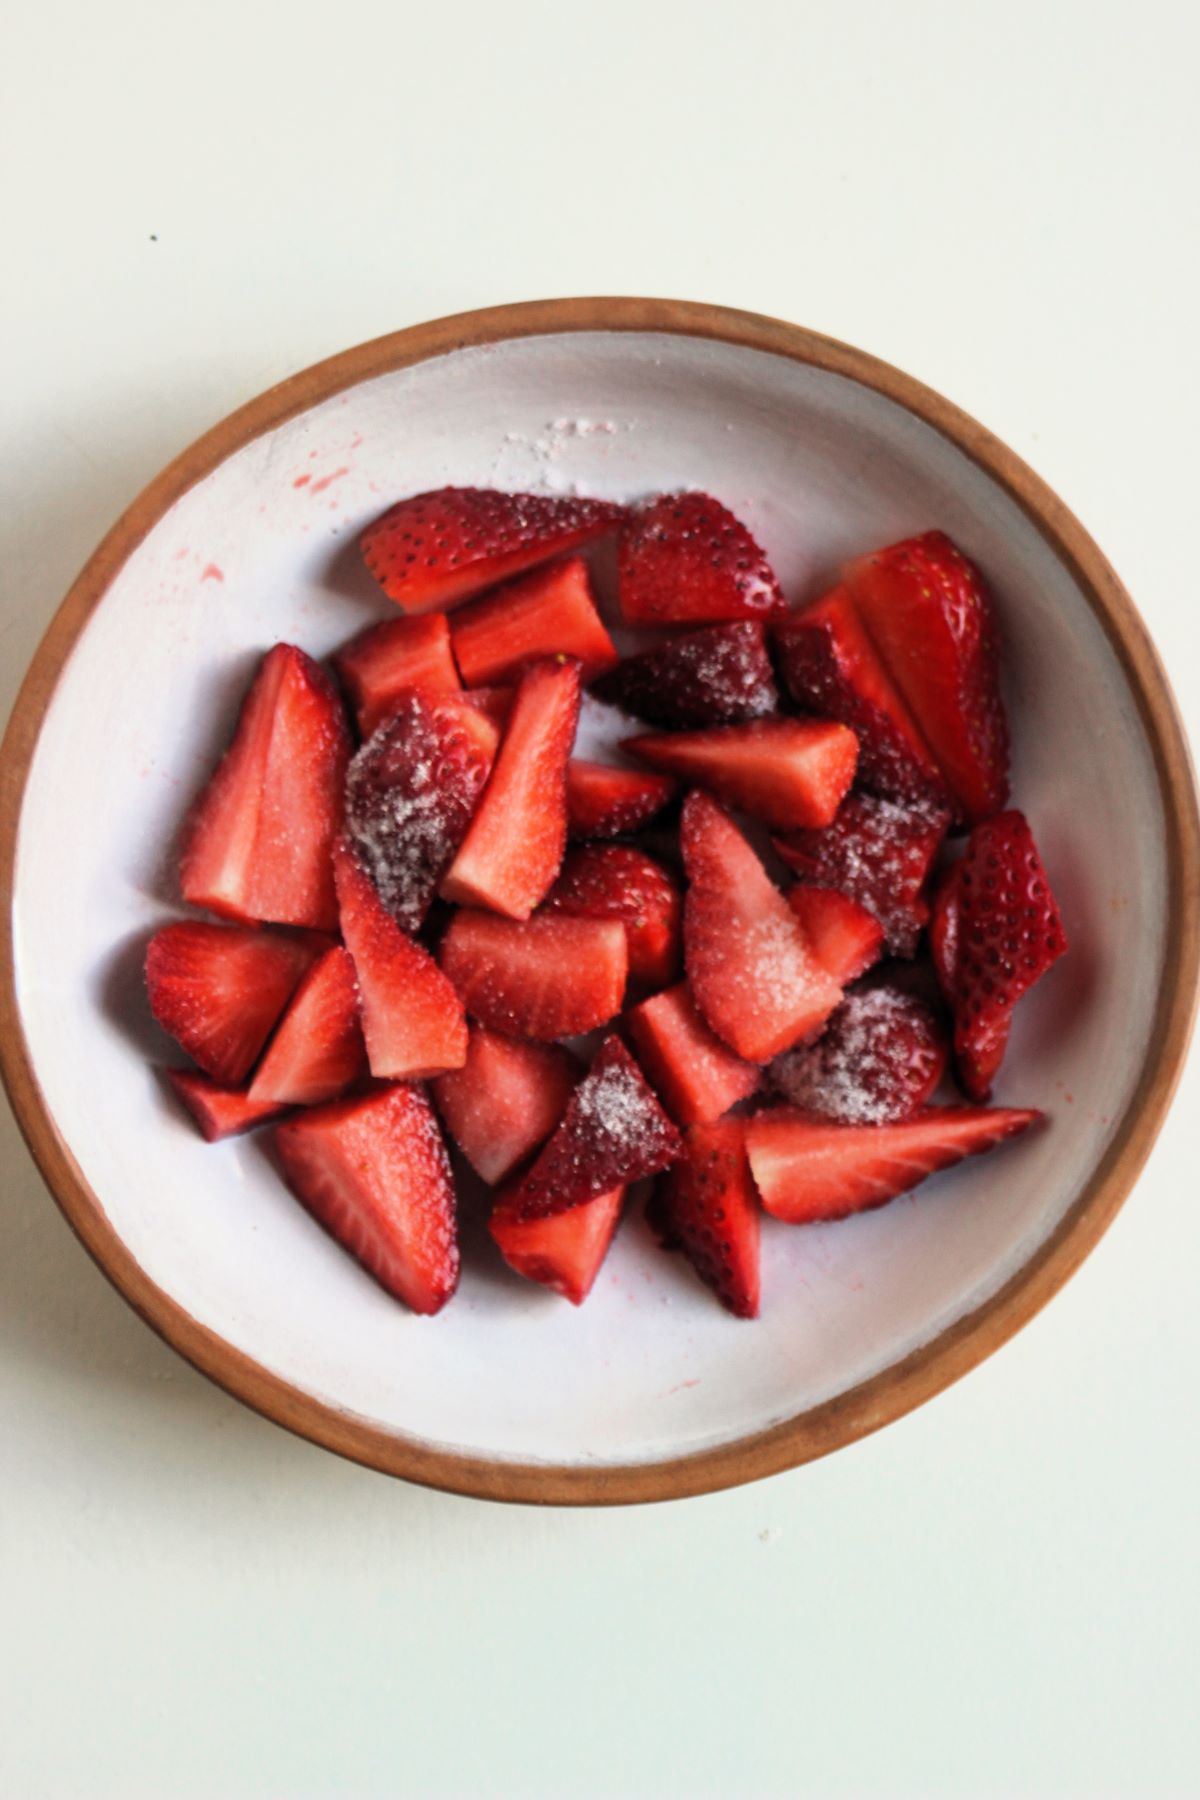 Sliced strawberries with sugar on a plate.